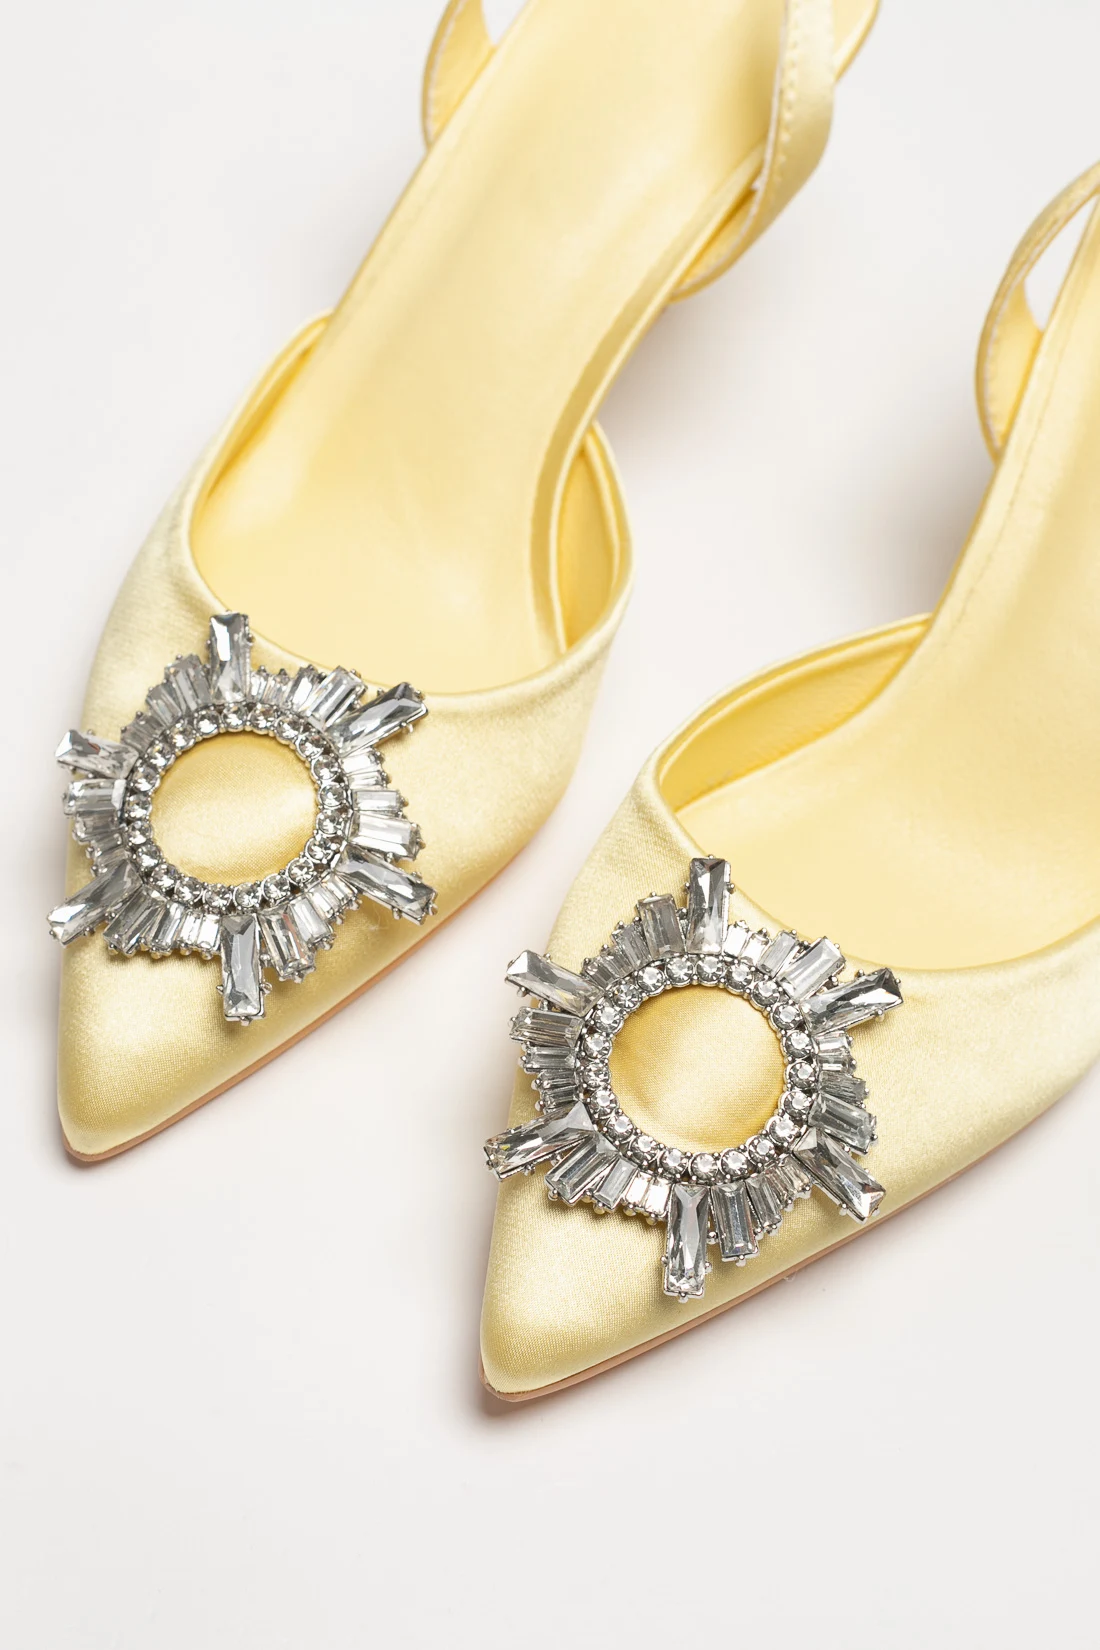 HEELED SHOES DUNIE - YELLOW